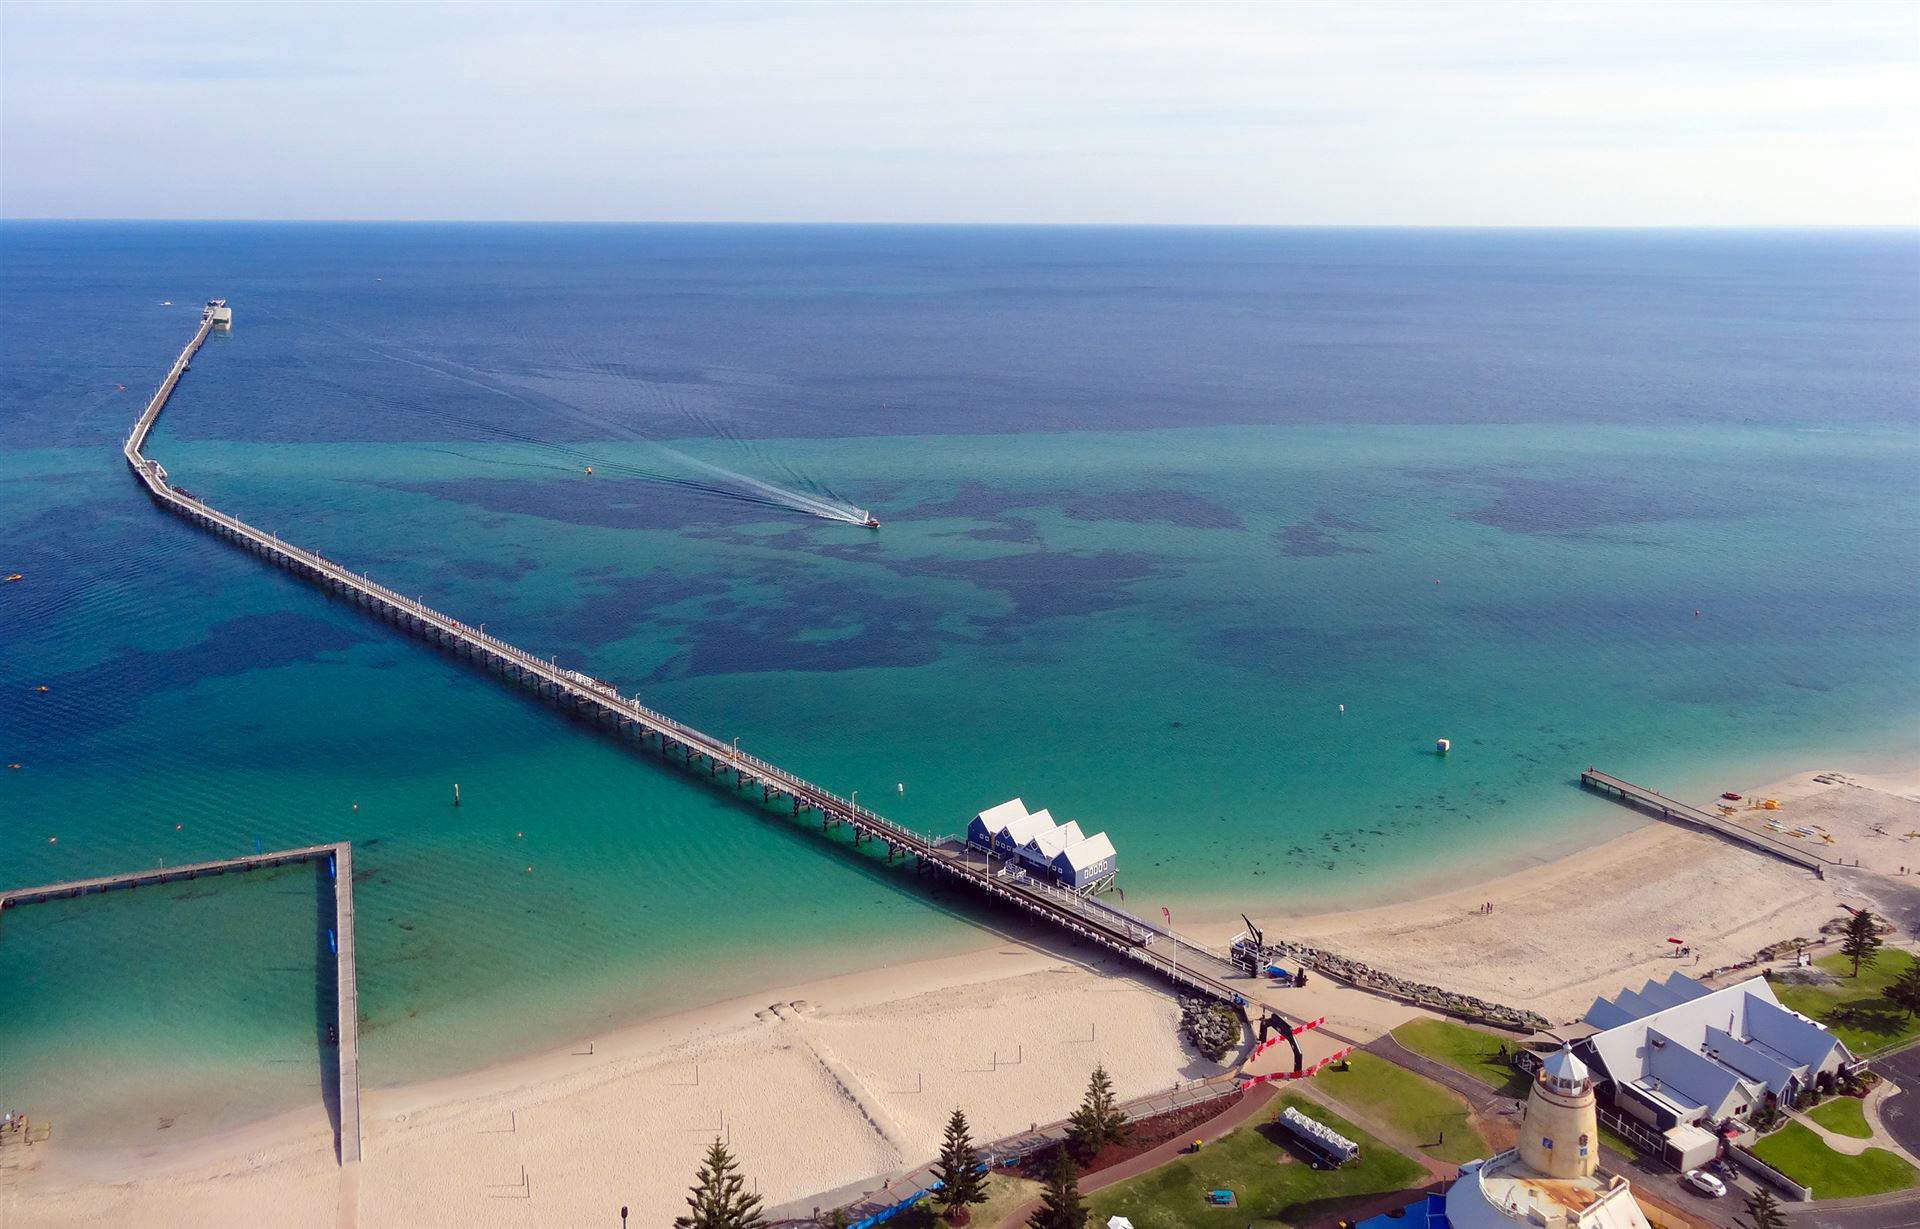 Aerial view of the CETACEAN at the end of Busselton Jetty